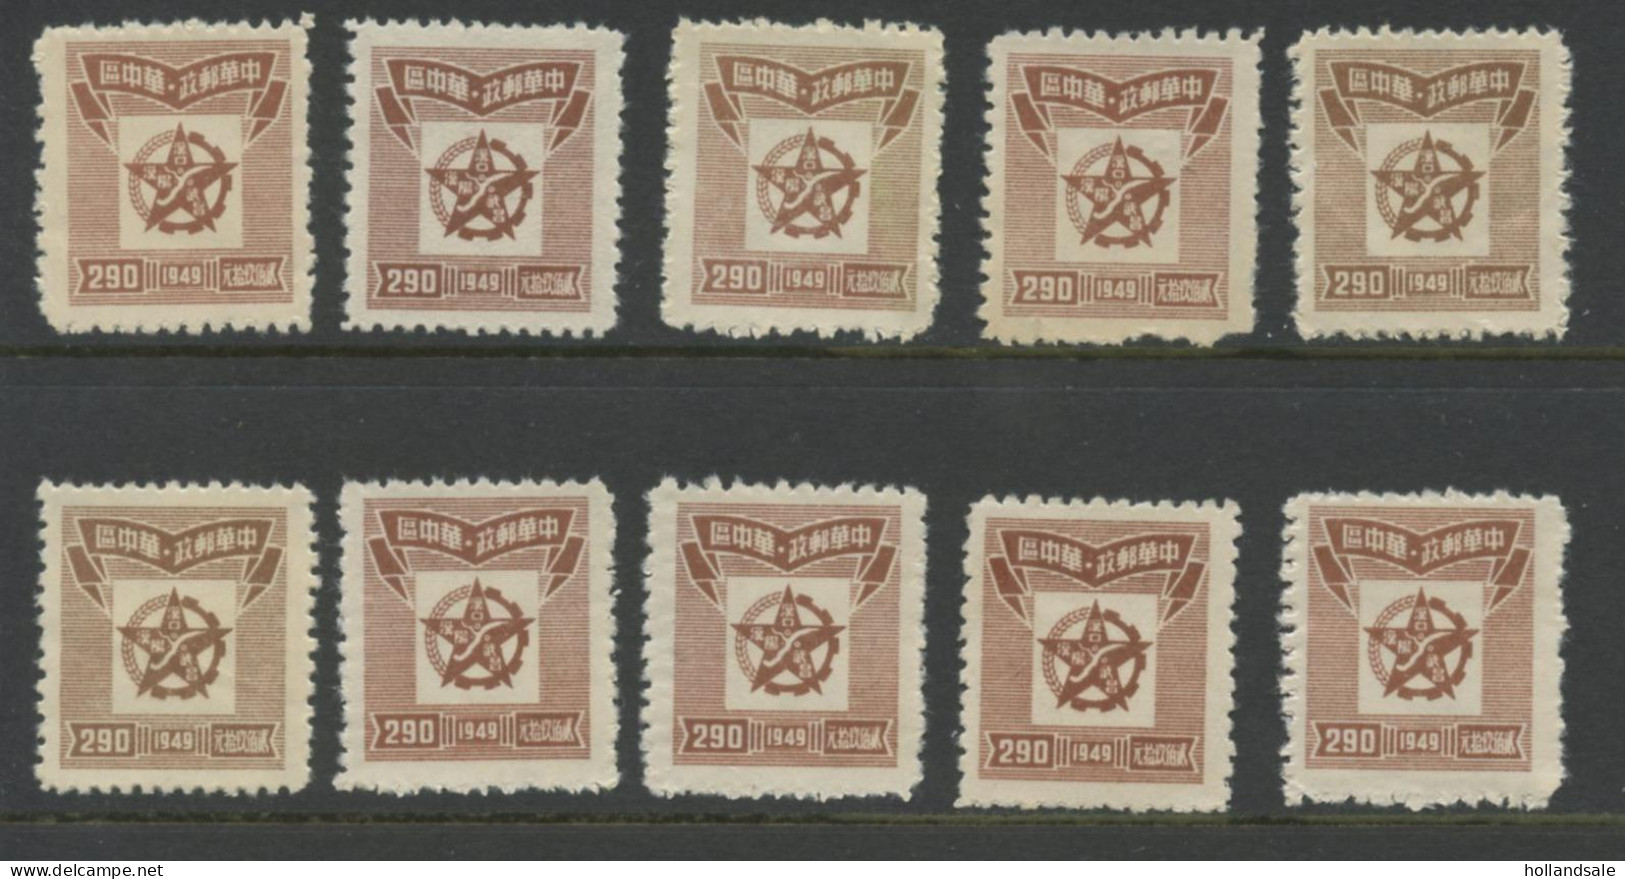 CHINA CENTRAL - 1949 MICHEL # 101. Ten (10) Unused Stamps. - Zentralchina 1948-49